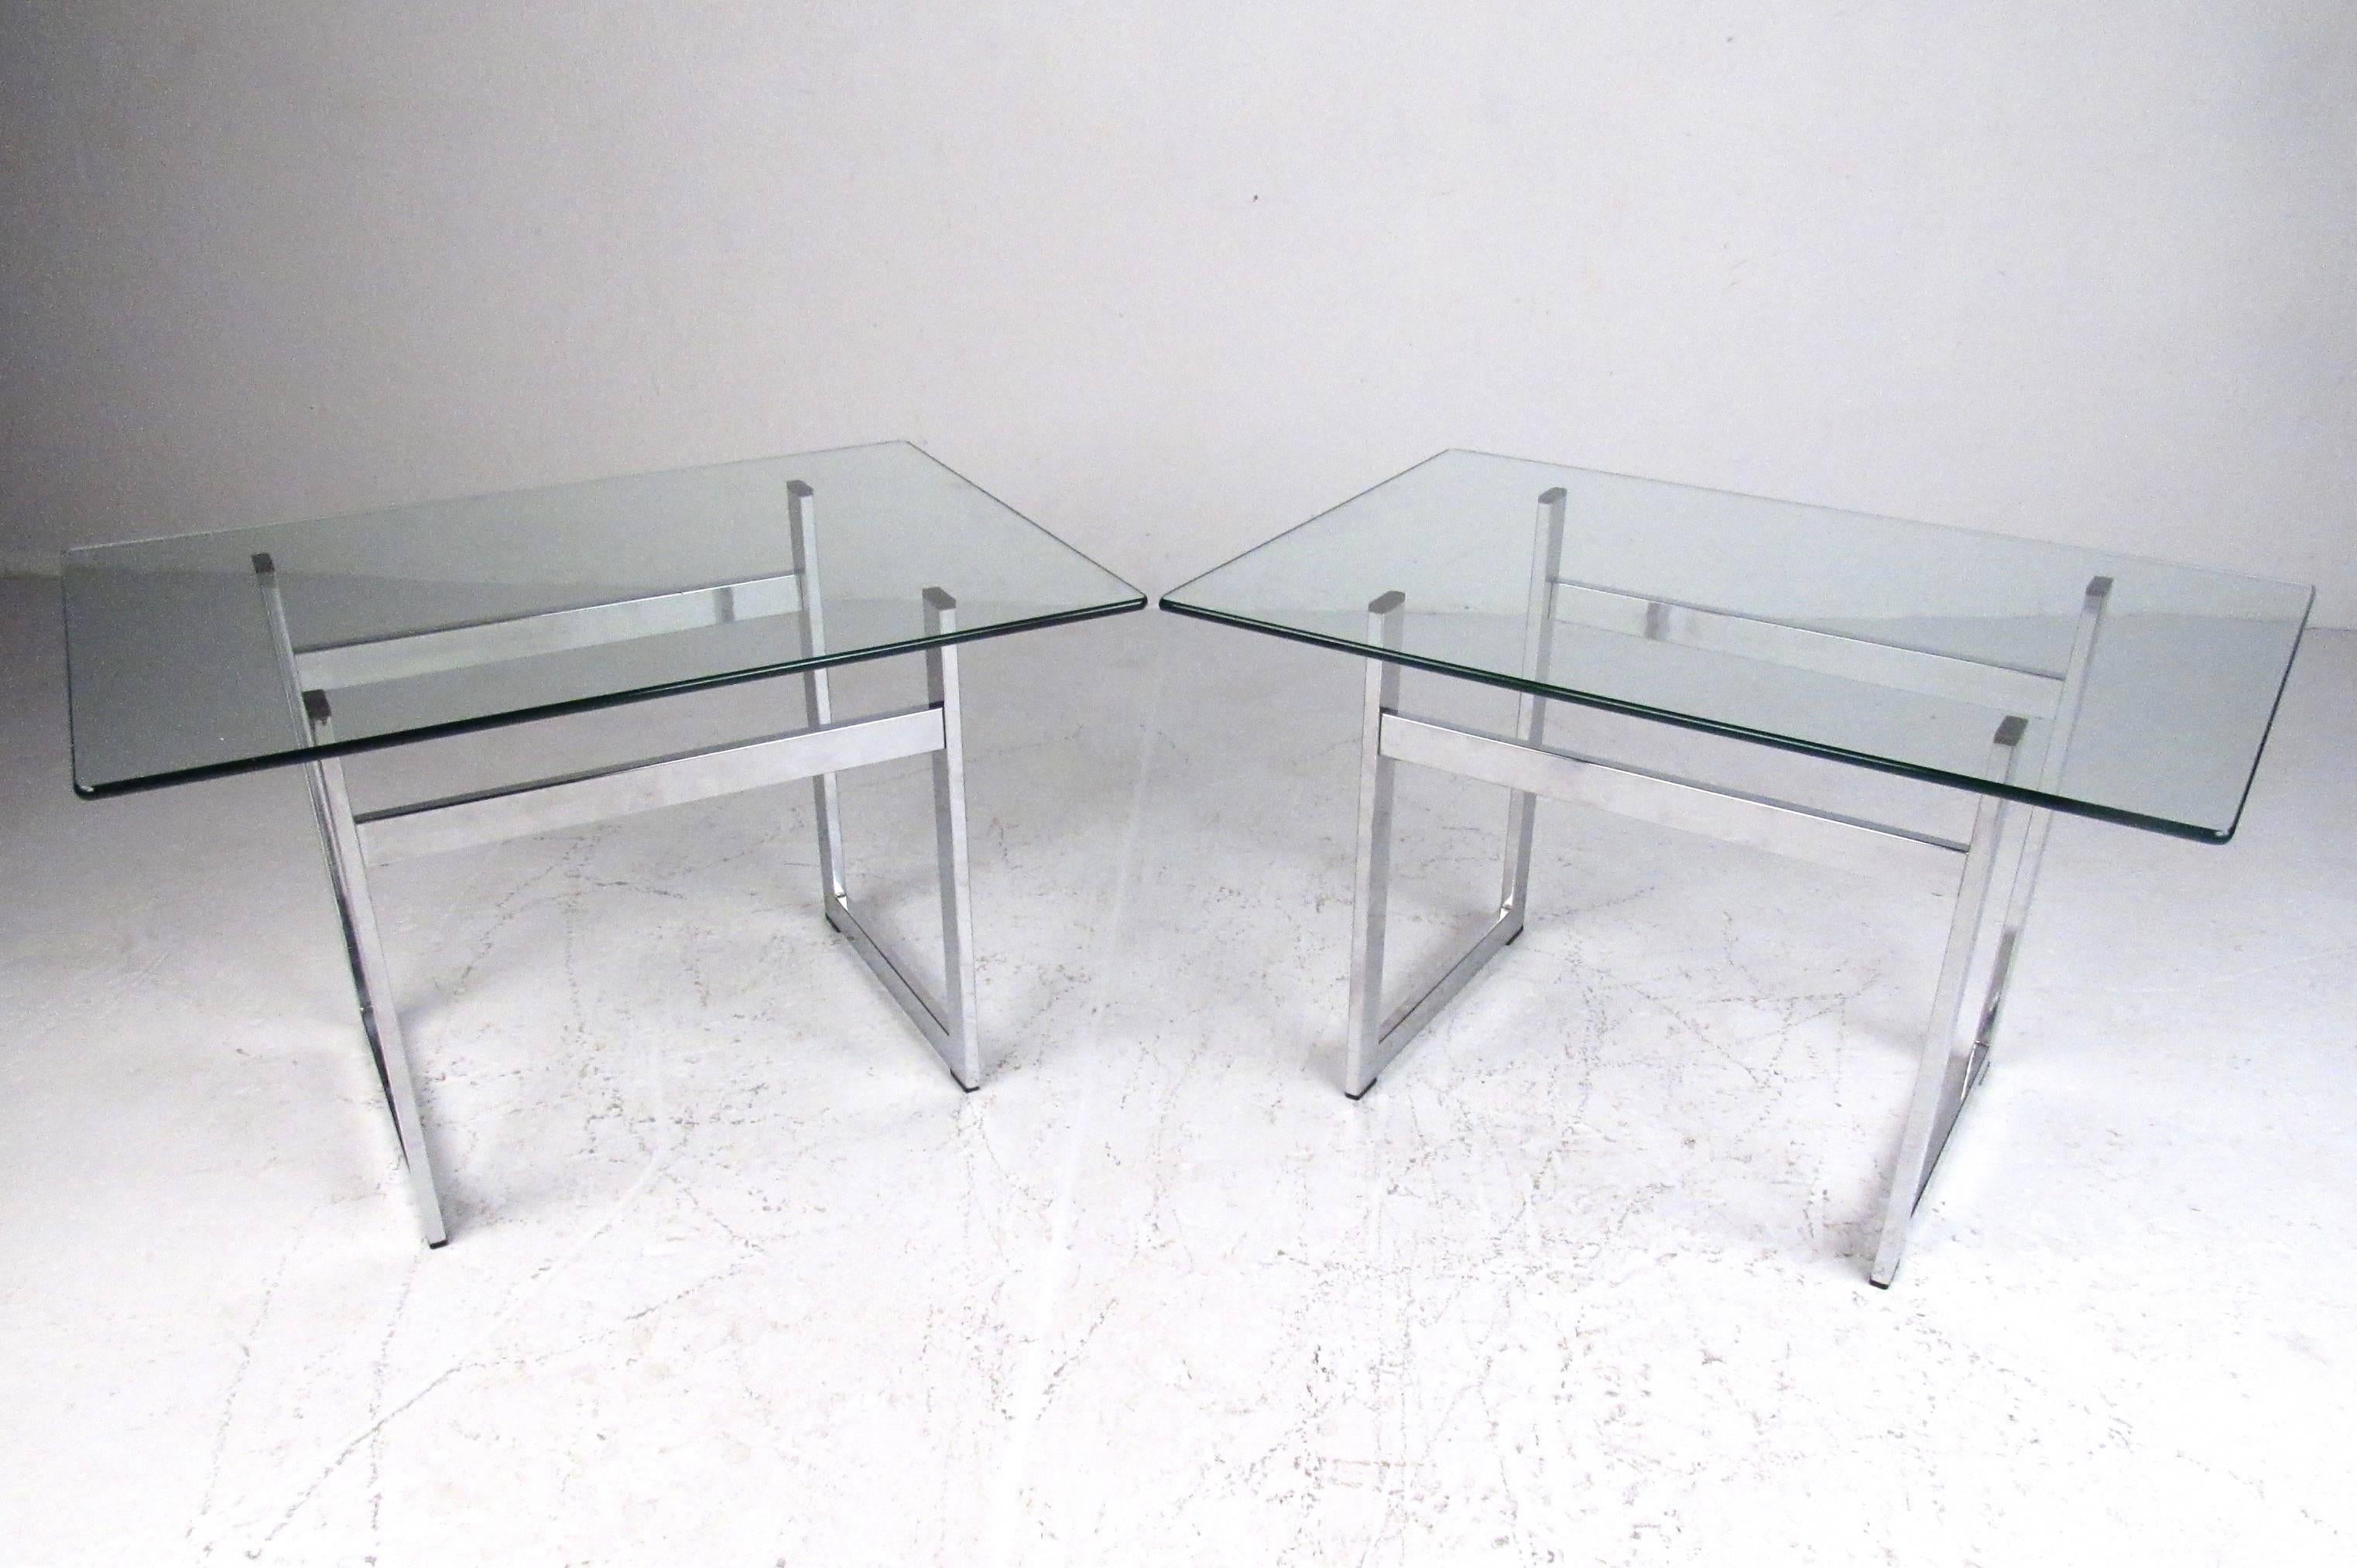 Stylish pair of contemporary modern end tables feature heavy chrome frame construction, rectangular glass tops, and unique midcentury style. Perfect addition to home or office, this matching pair make great lamp tables, sofa side tables, or display.